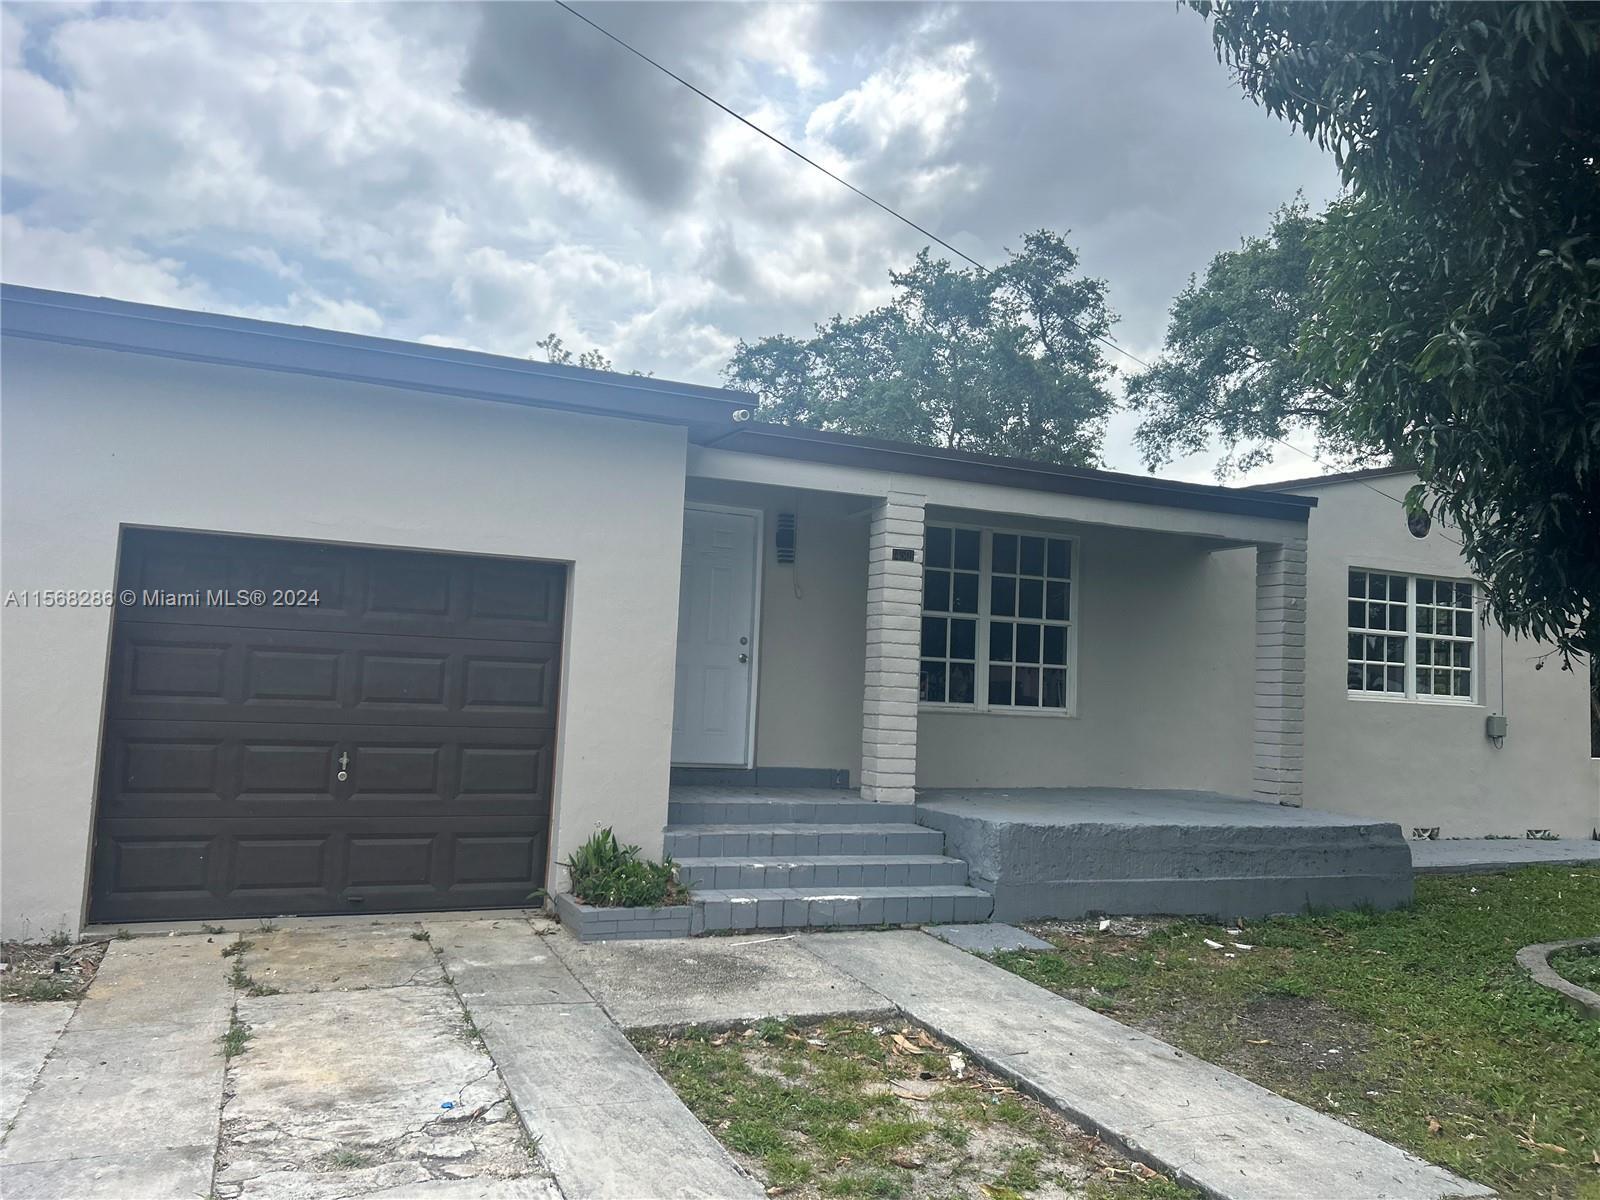 Photo of 14501 NW 16th Ave in Miami, FL